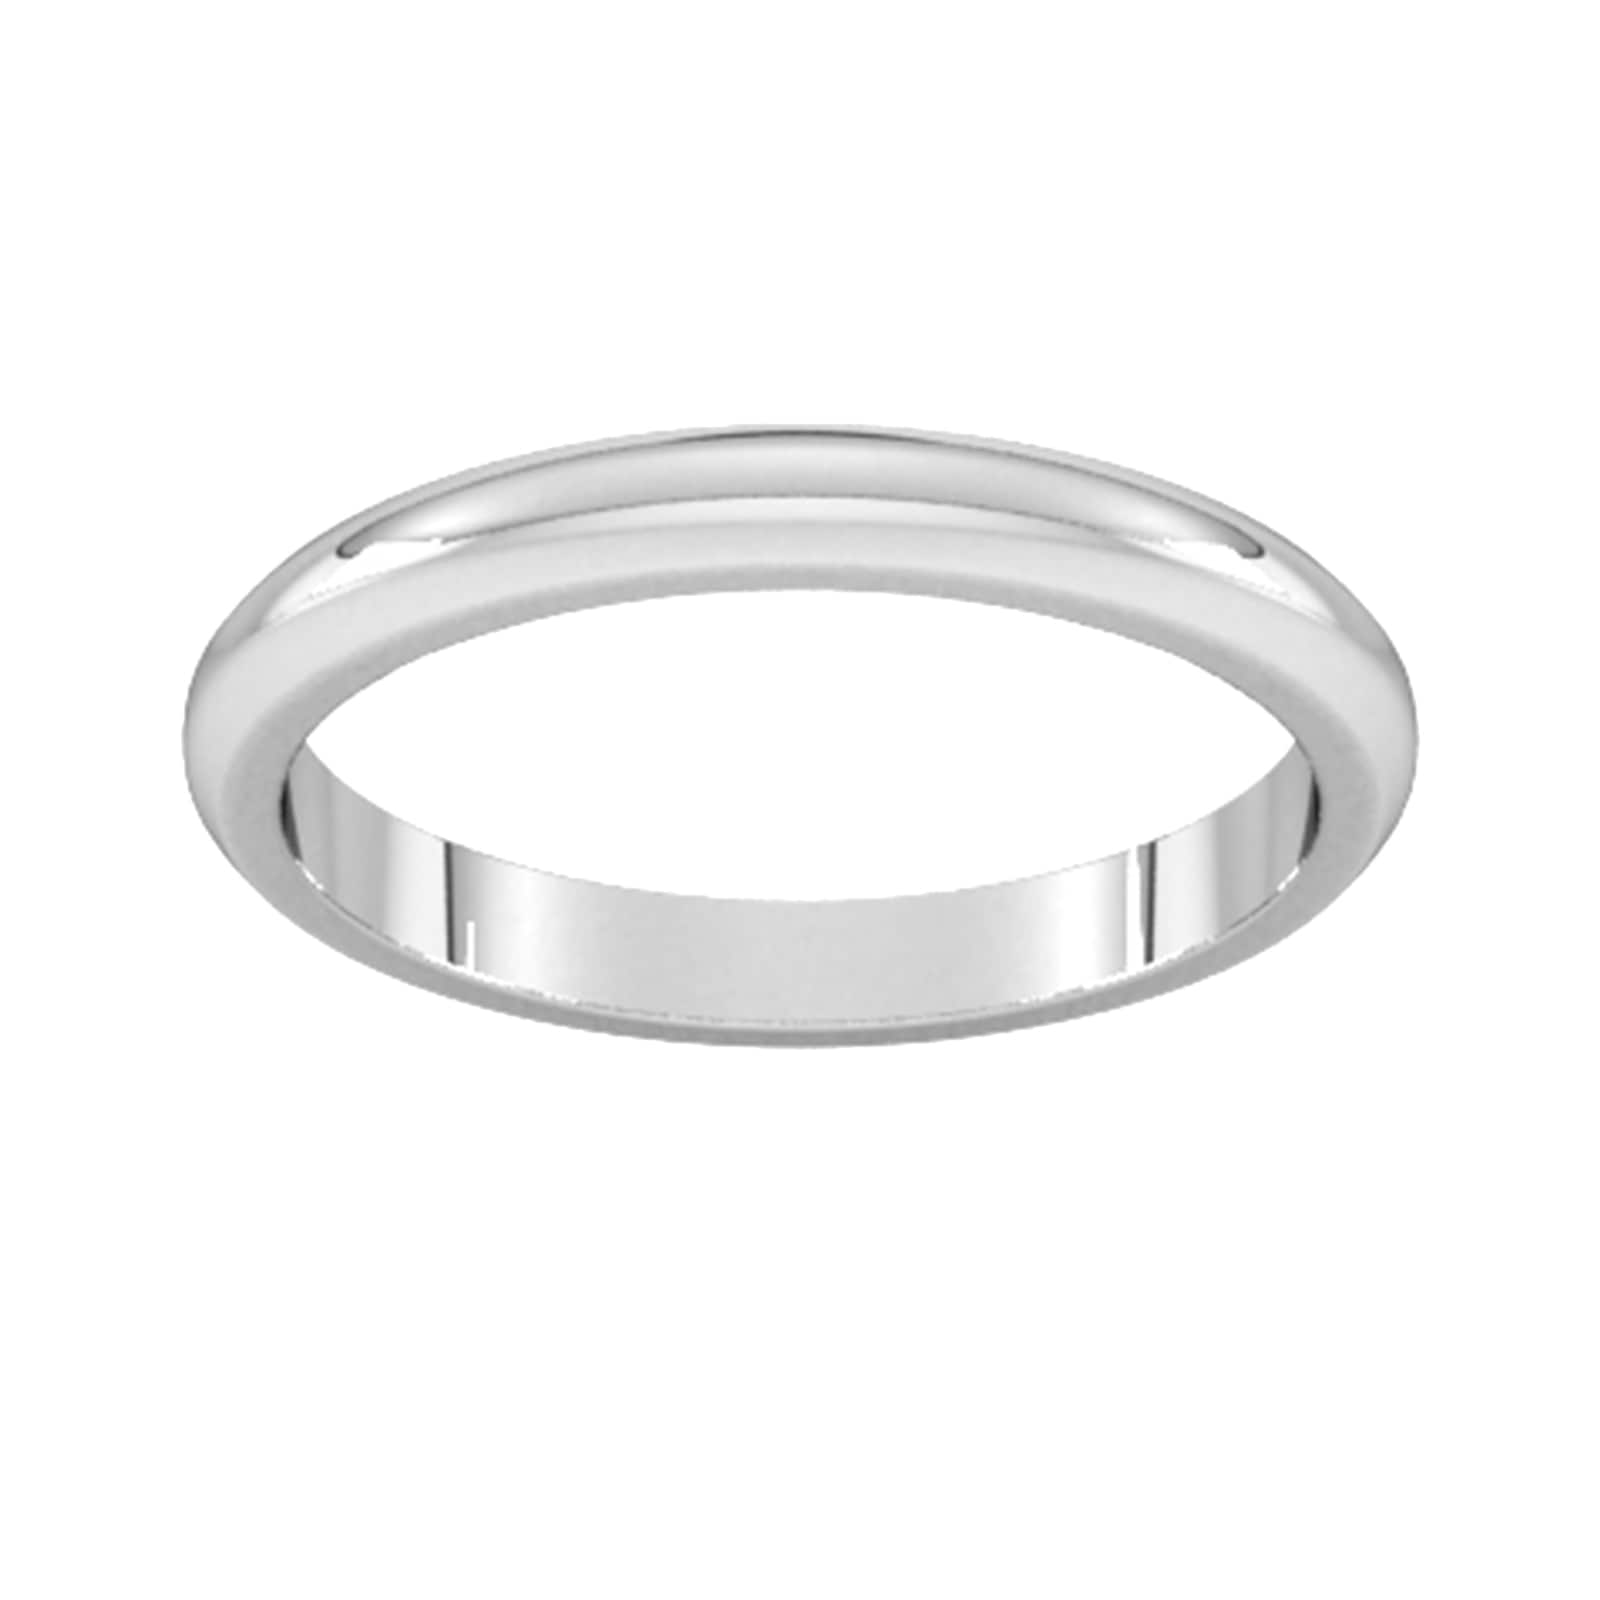 2.5mm D Shape Heavy Wedding Ring In 18 Carat White Gold - Ring Size U